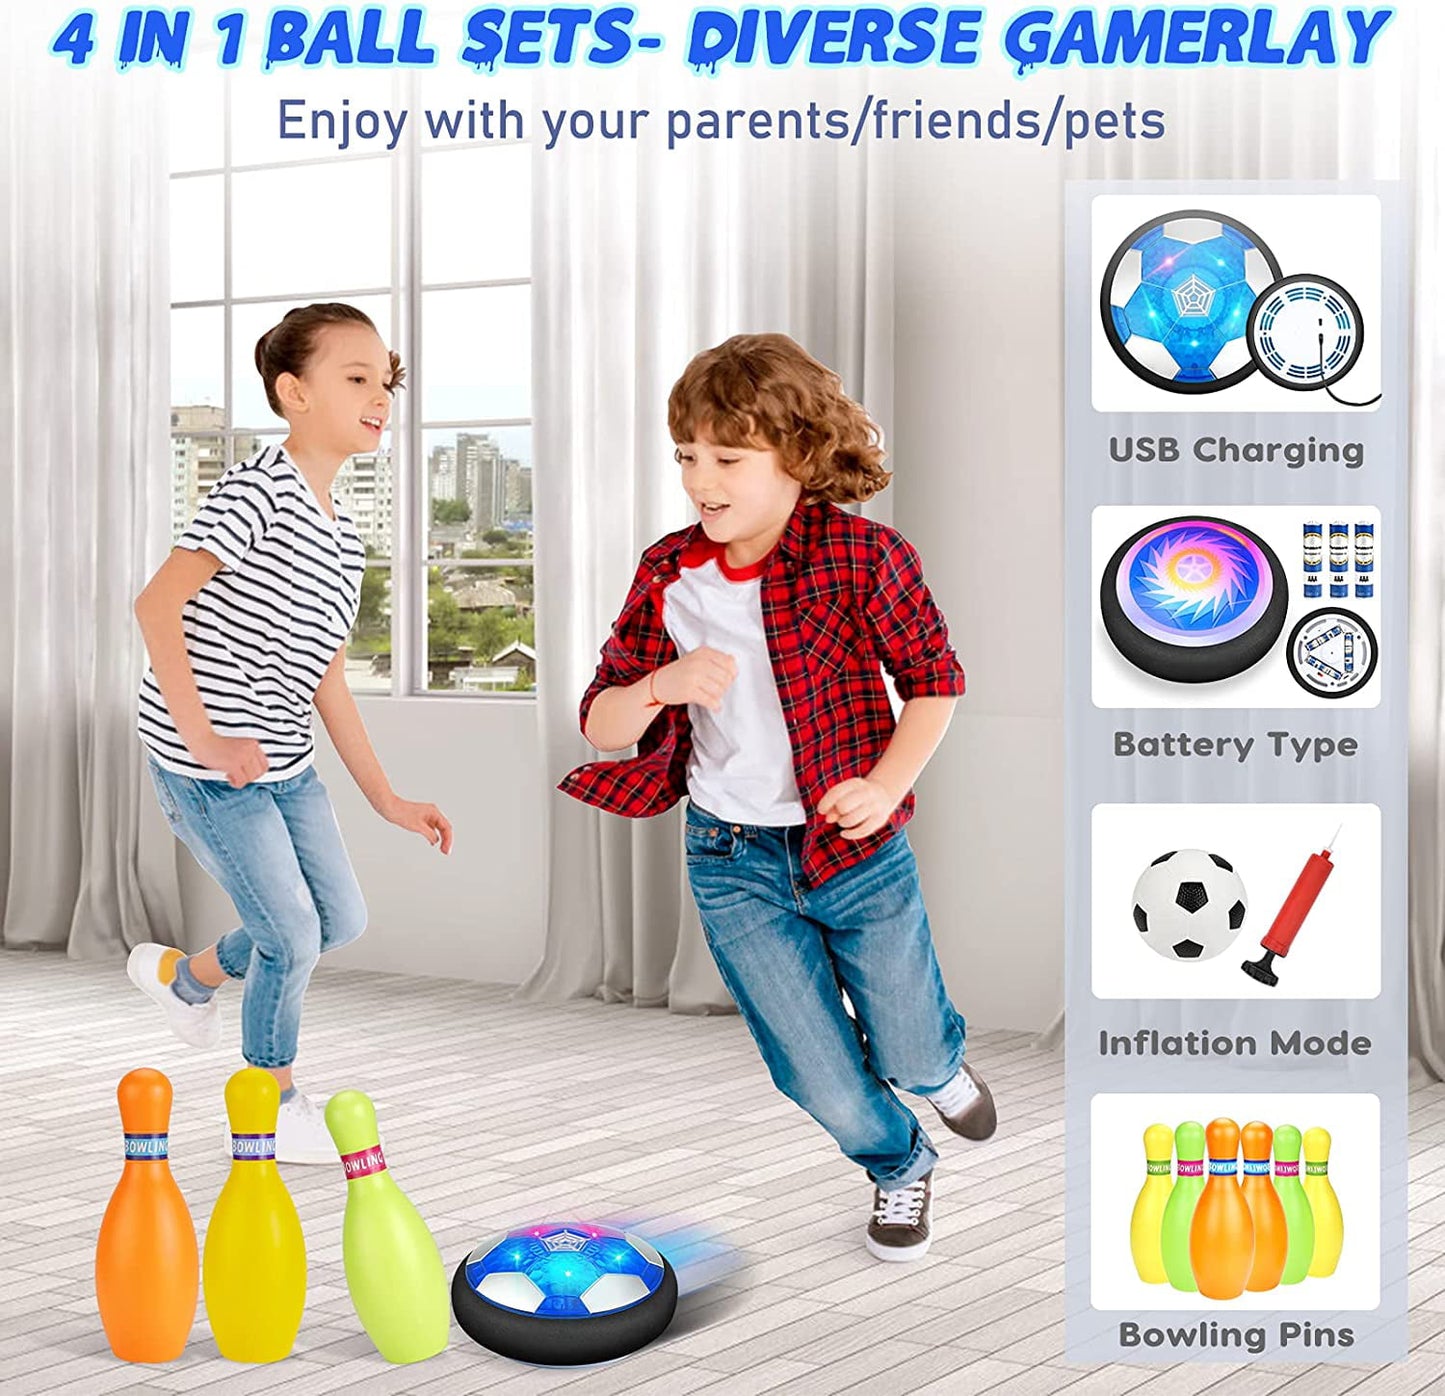 Hover Soccer Ball Set with 2 Goals, 3-in-1 LED Soccer Hockey Bowling Set Indoor/Outdoor Toys Gifts for Kids Boys Girls Ages 3+